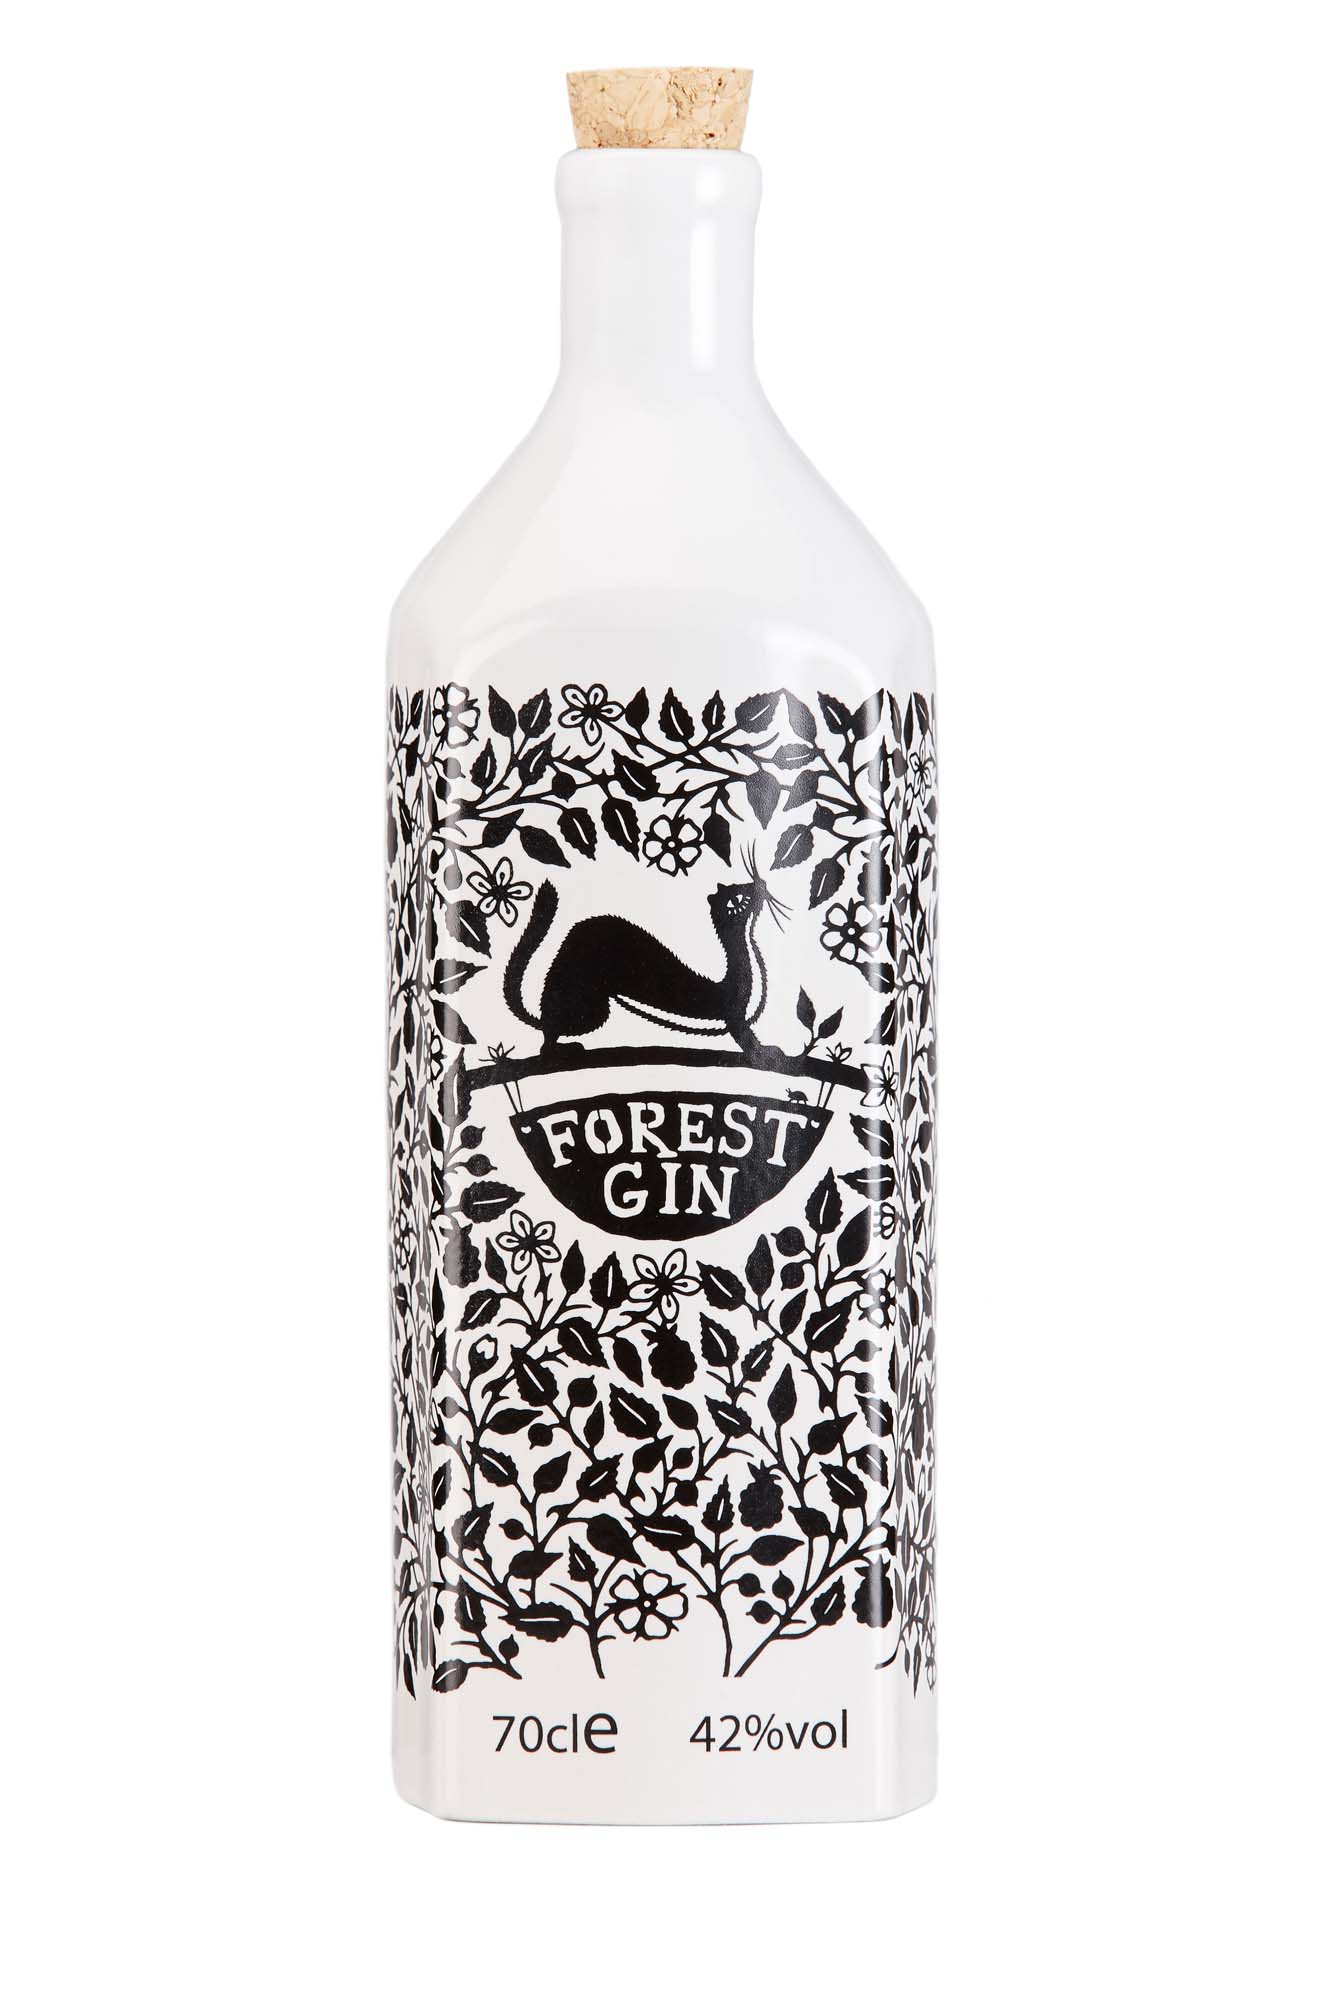 Forest Gin - I hear it tastes amazing but I can't bring myself to open it; it's soooo beautiful